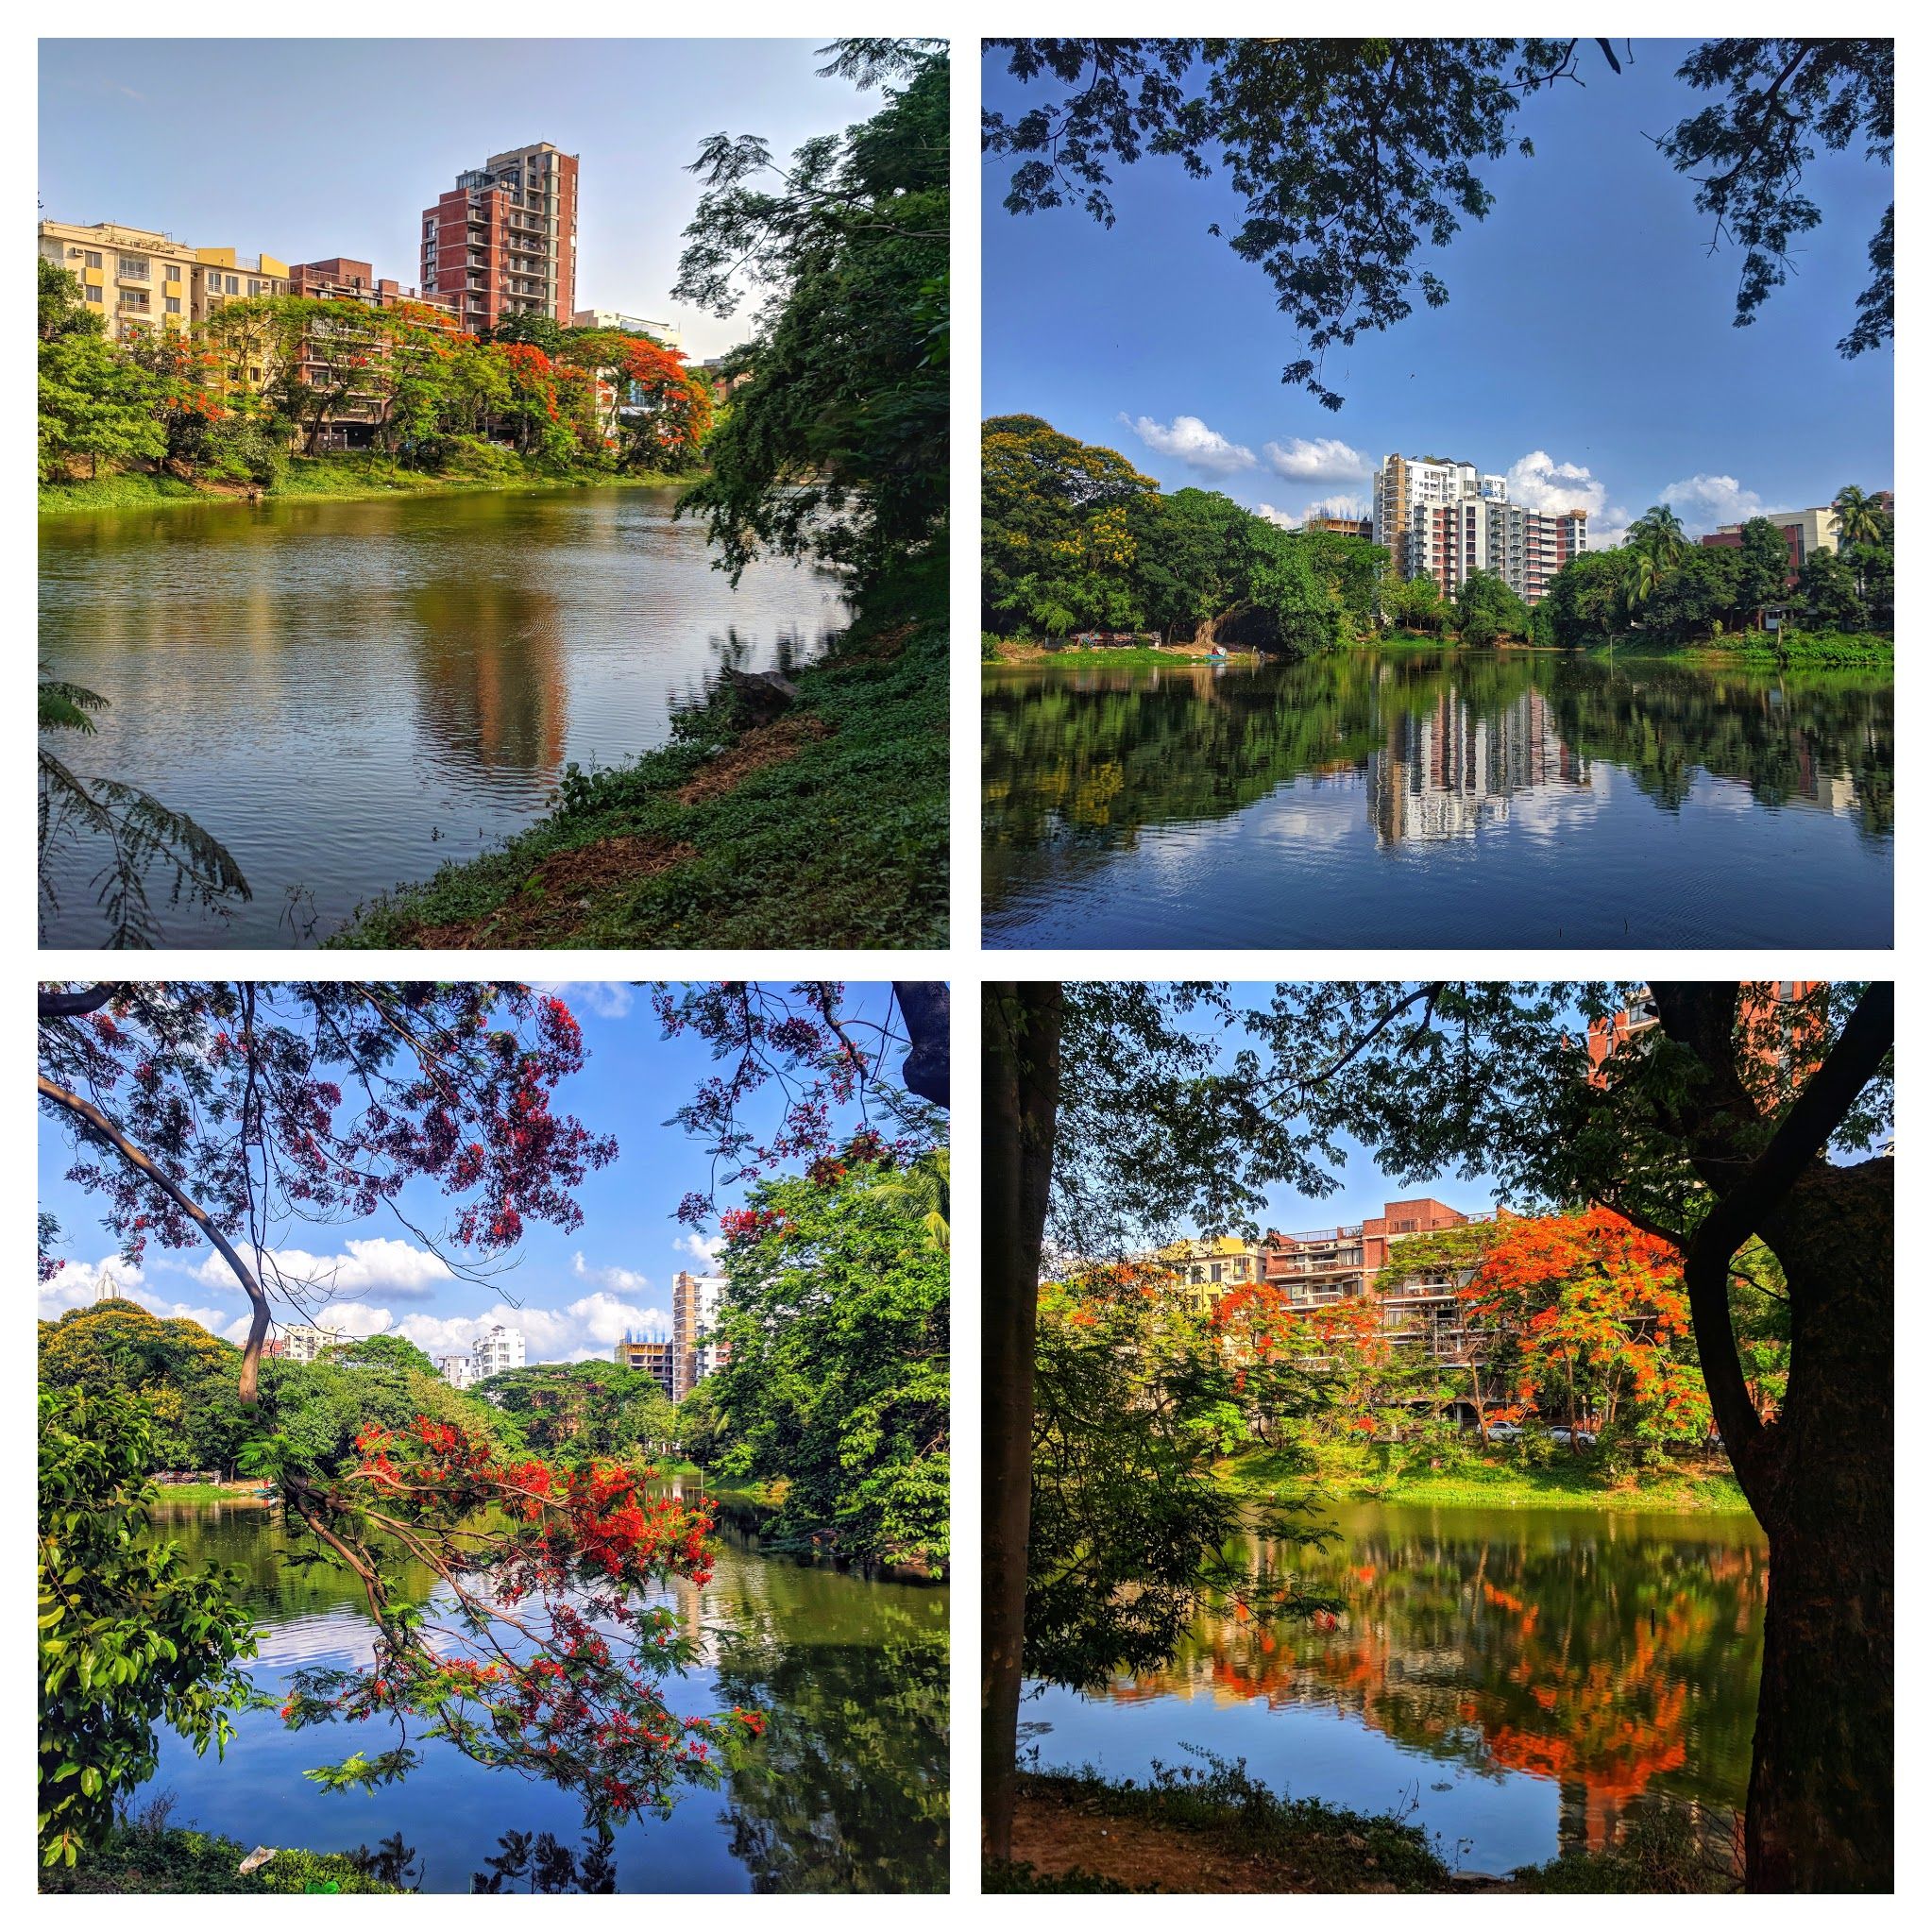 The different view of Dhanmondi lake  which shows  the Wonder of  Summer nature